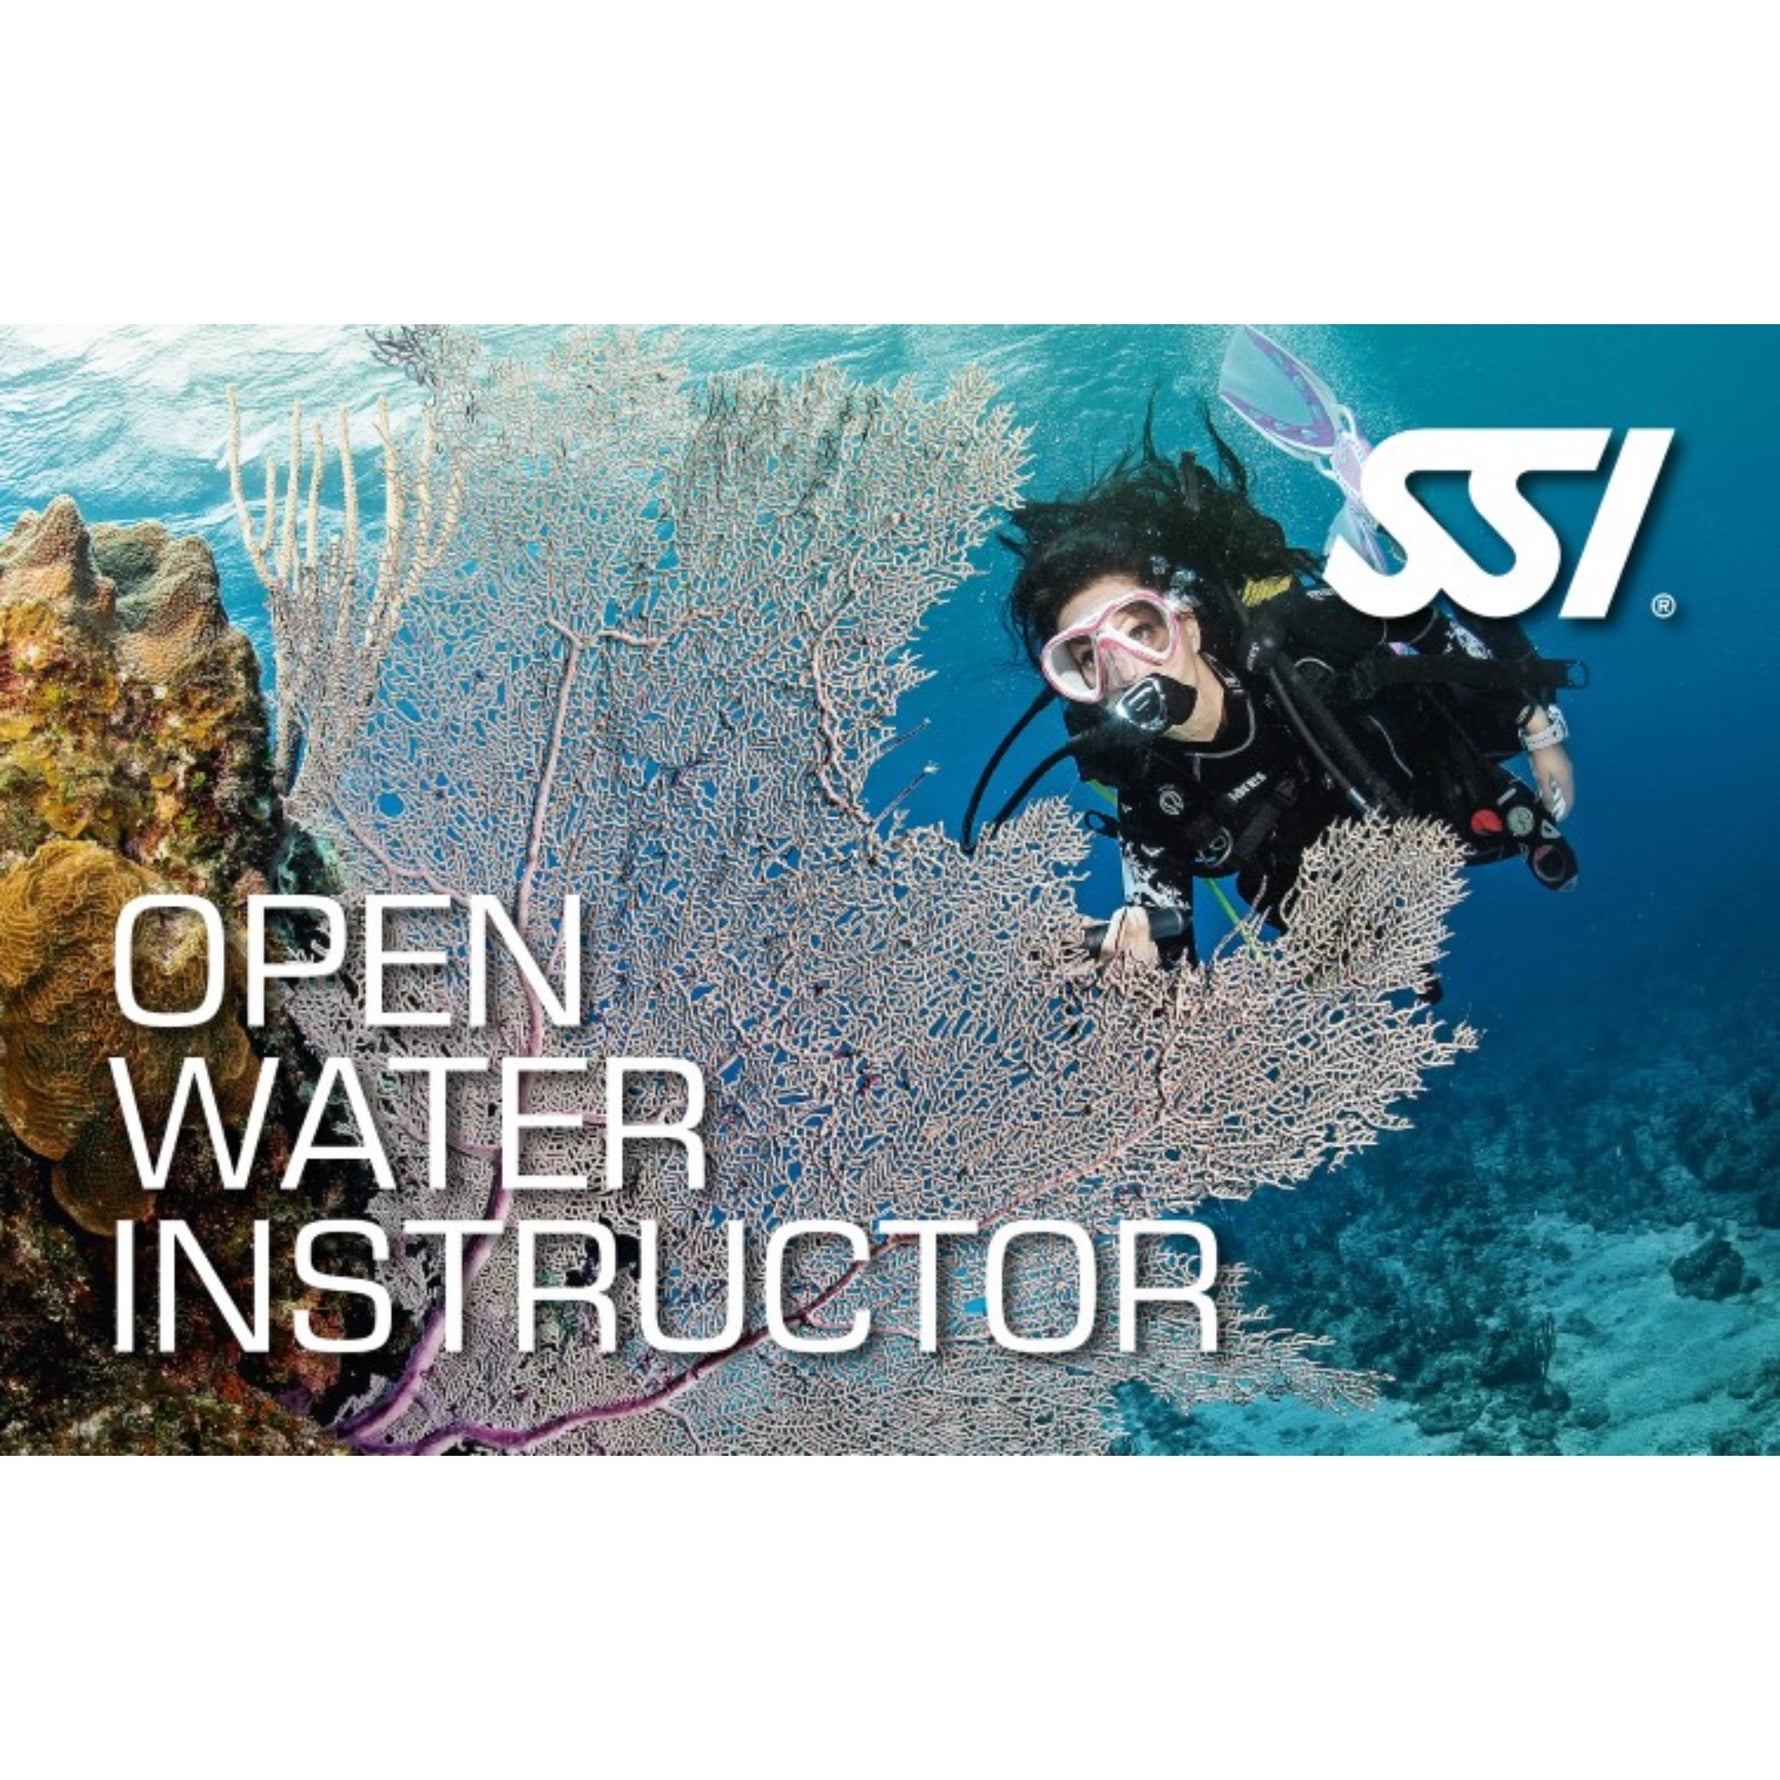 Becoming a scuba Instructor